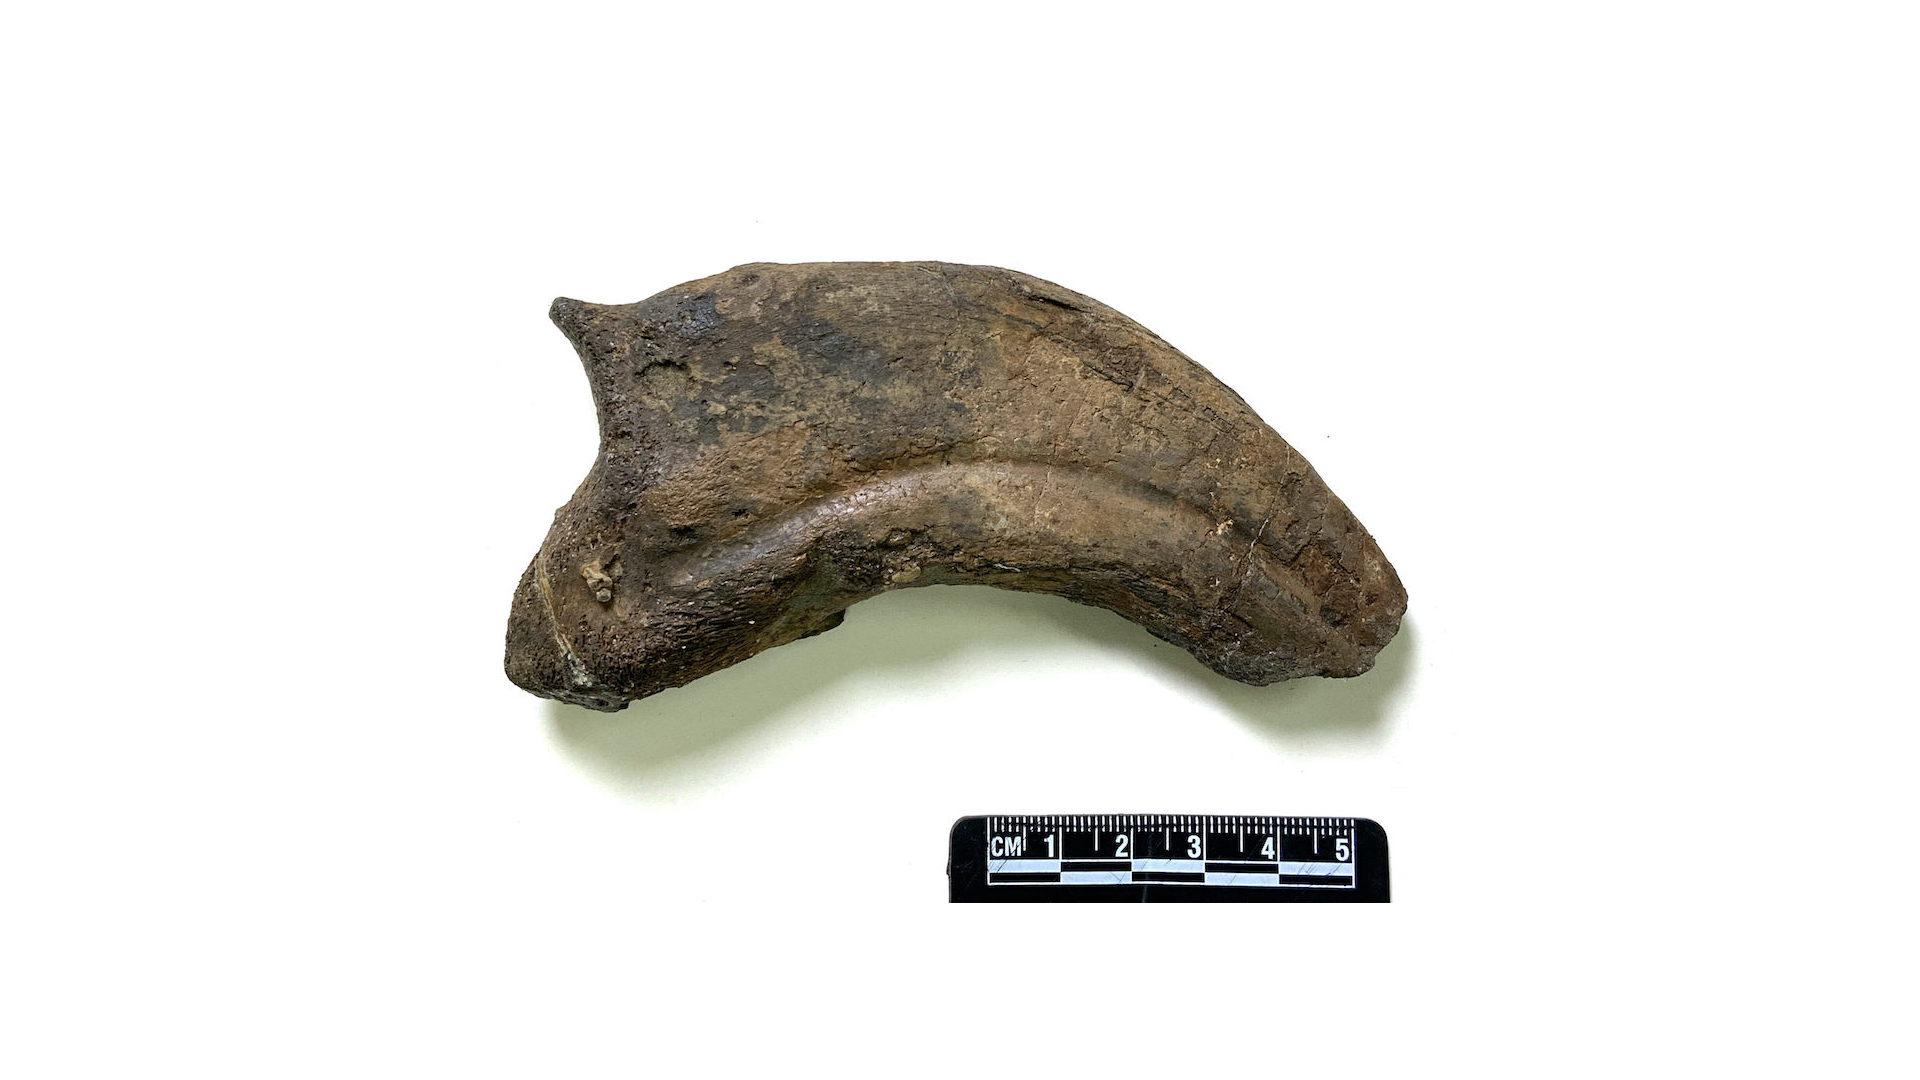 One of the three fossilized claws of Paralitherizinosaurus japonicus, described in the new study.